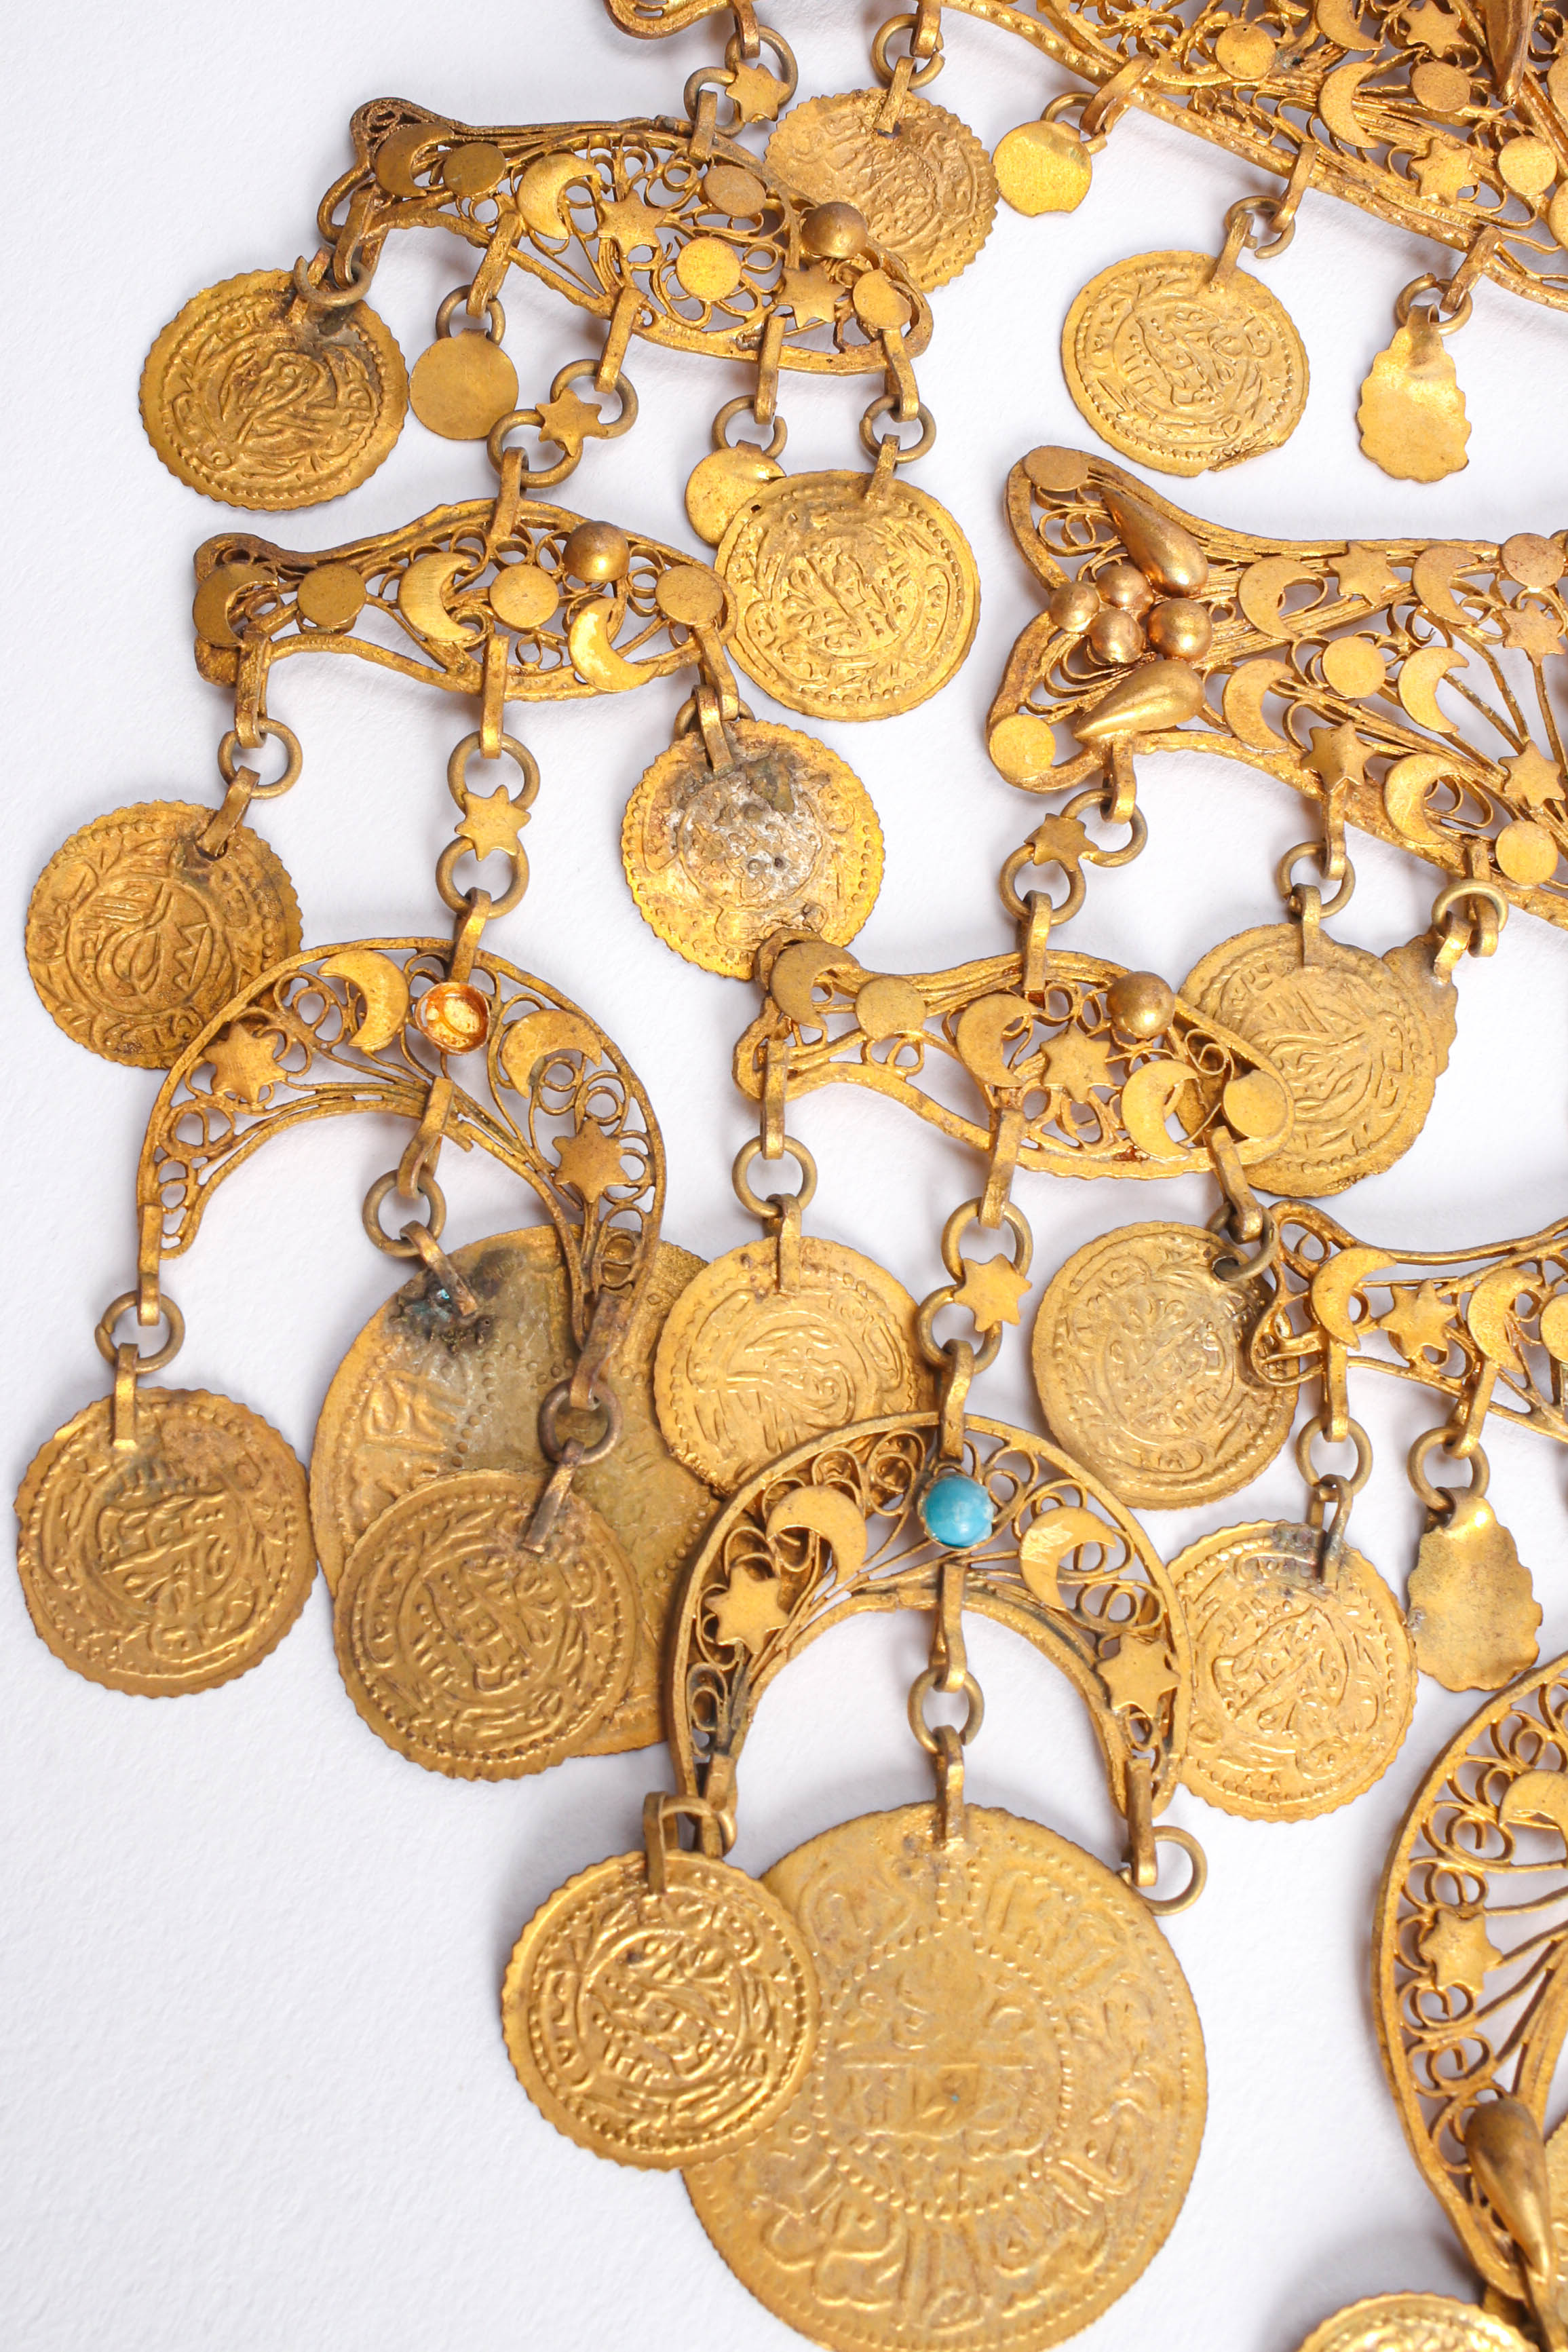 Vintage Filigree Moon Fish Necklace  charms detail & missing turquoise bead detail @ Recess LA